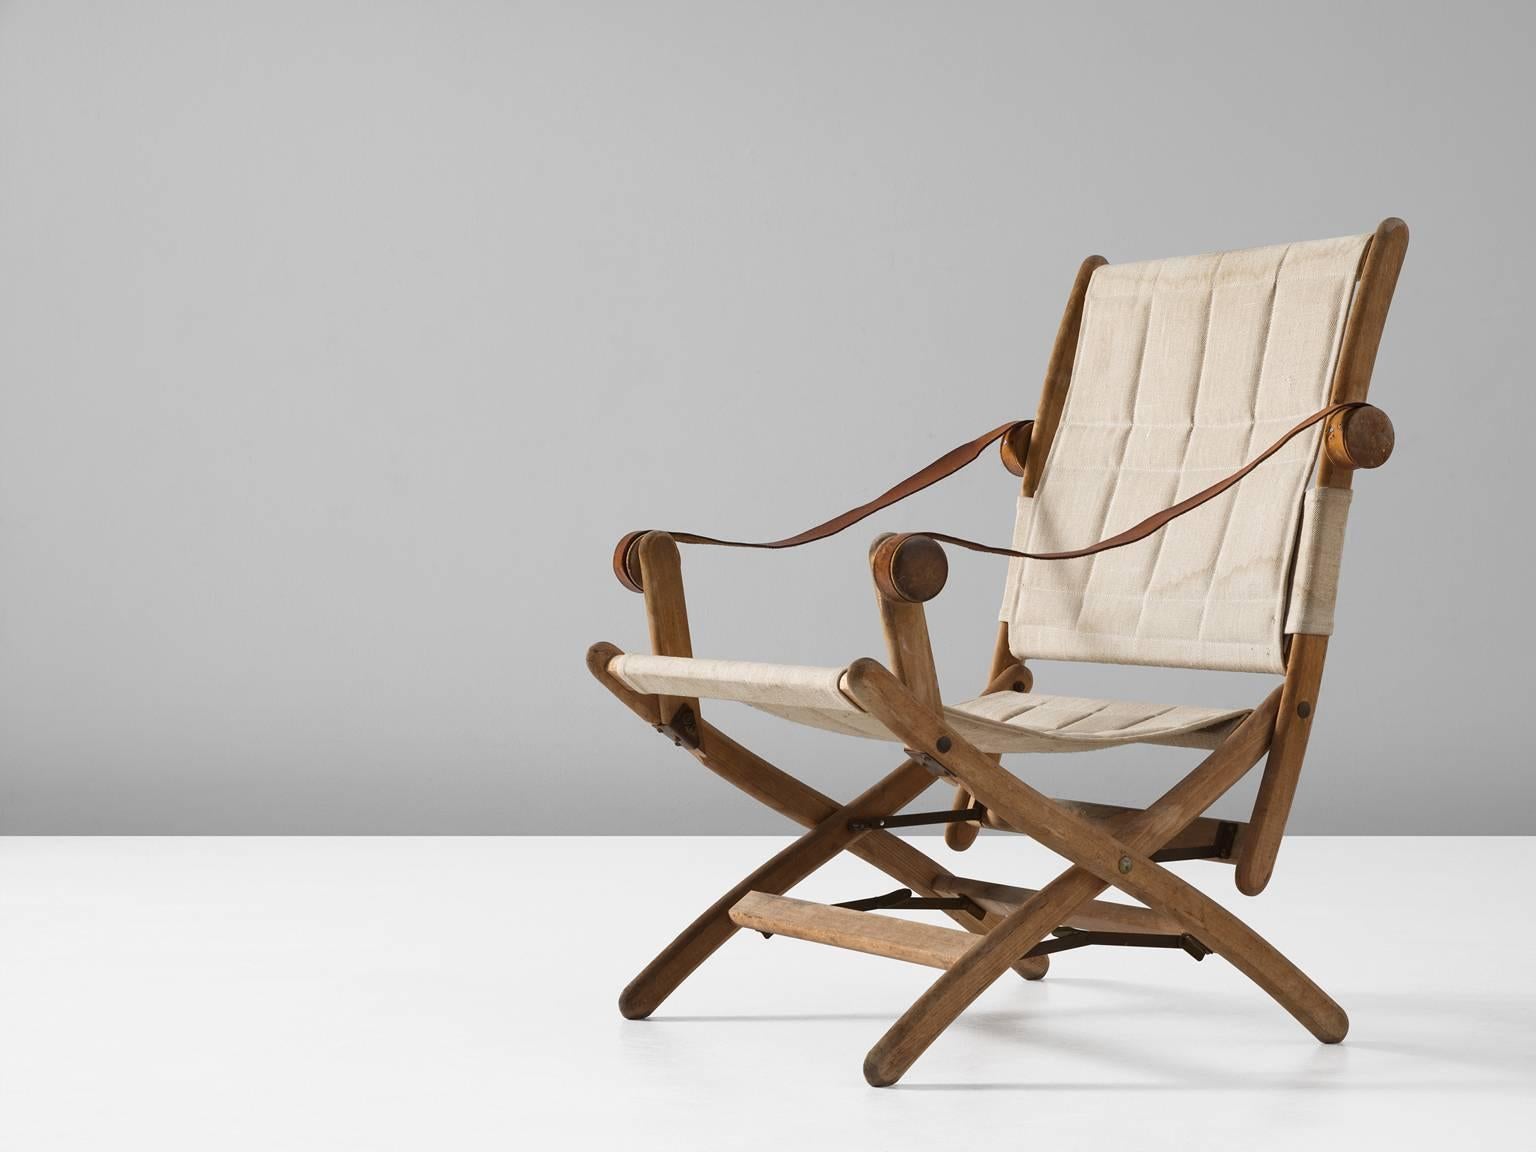 Folding chair in beech, leather and canvas, Scandinavia, 1950s.

Interesting safari chair with beautiful cognac leather armrests. The wooden frame in beech shows nice details, so as the knobs for the armrests. The legs are X-shaped with